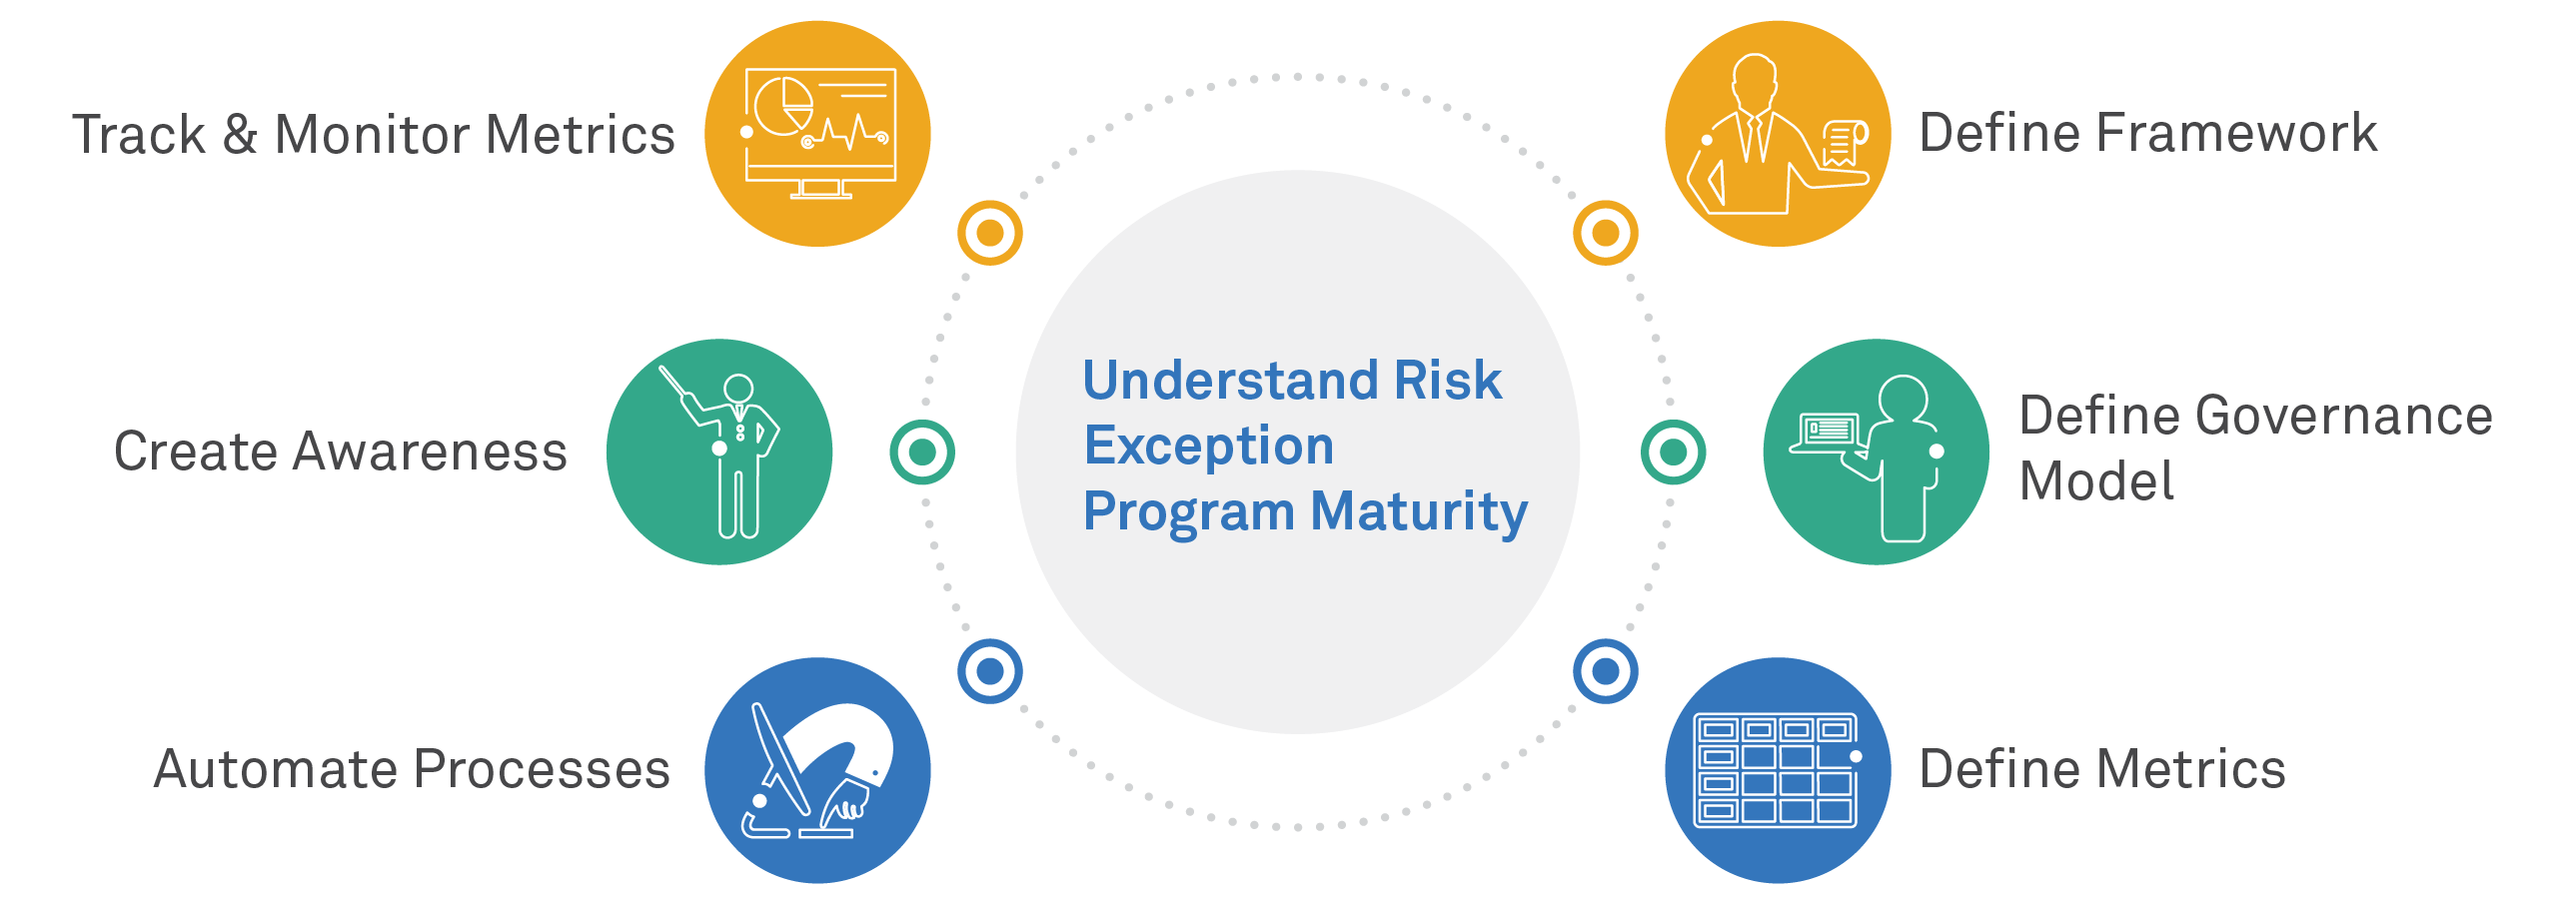 Why Managing Risk Exceptions Matters During the Unprecedented Times